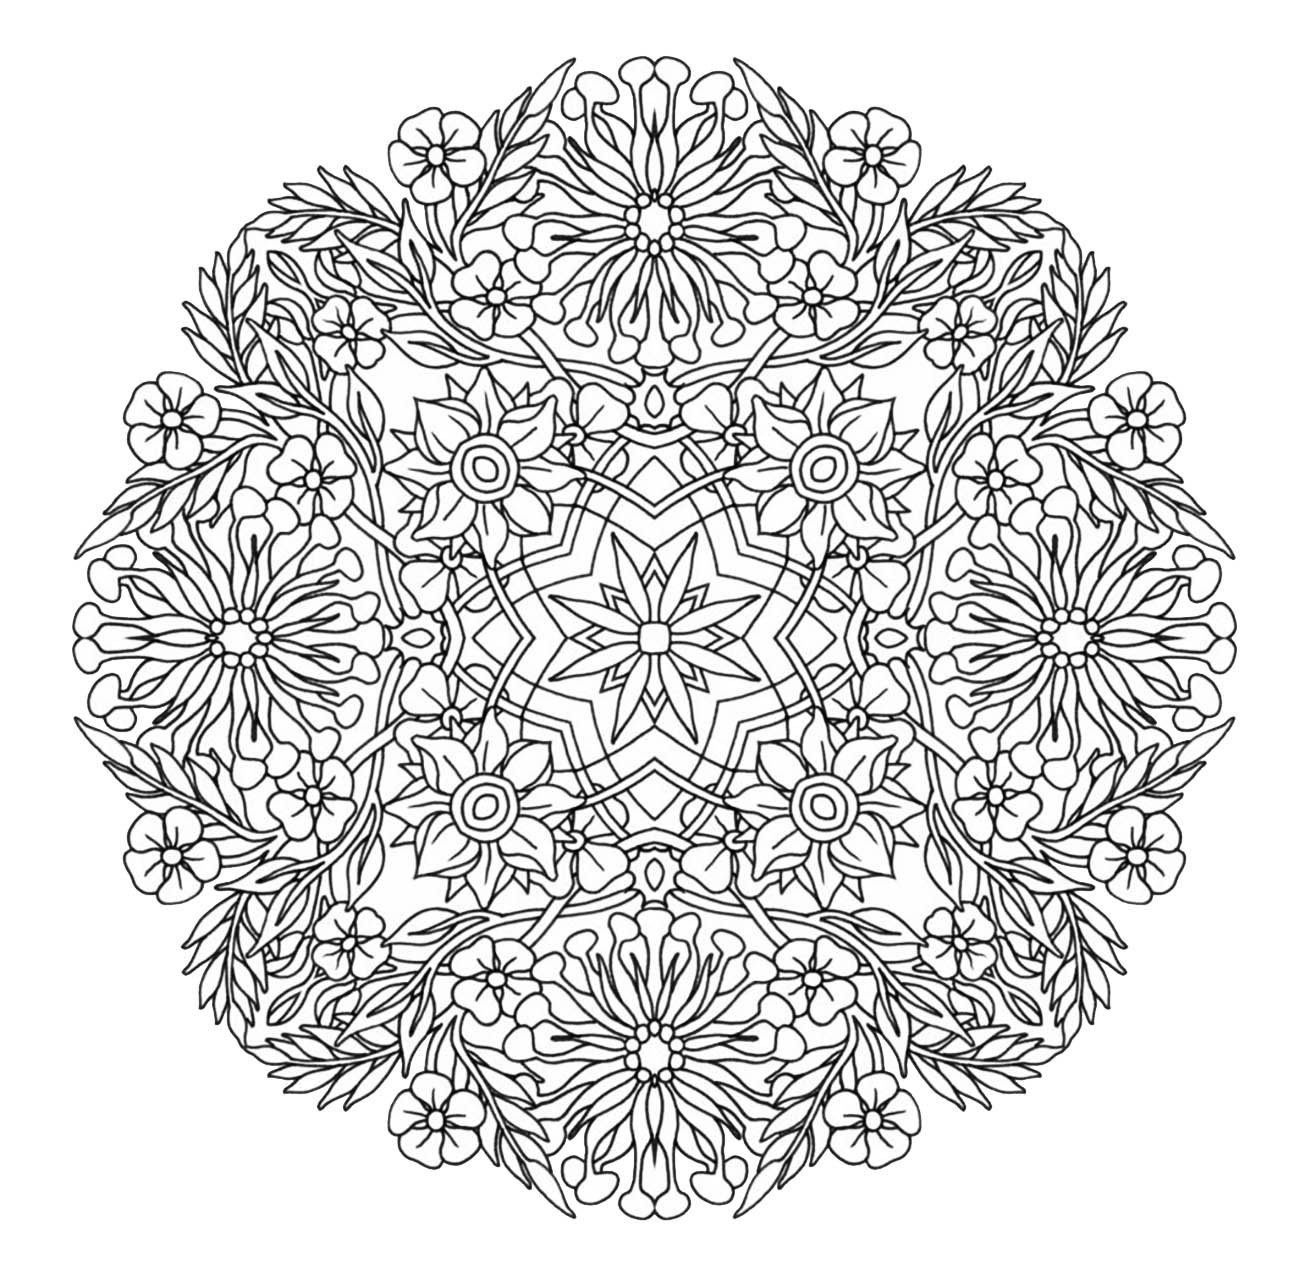 Mandala Coloring Pages Pdf
 Mandala to in pdf 9 M&alas Adult Coloring Pages